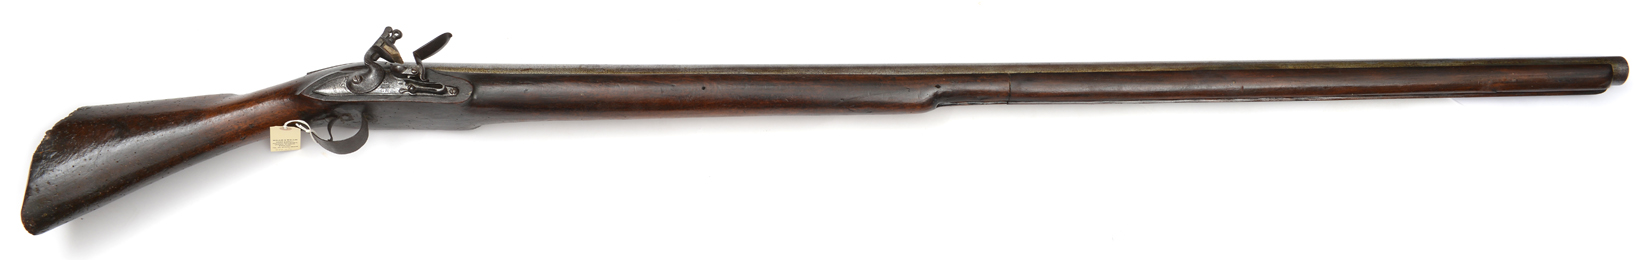 A massive heavy flintlock punt gun or wall piece, 79” overall, barrel 62” with small bead fore - Image 2 of 2